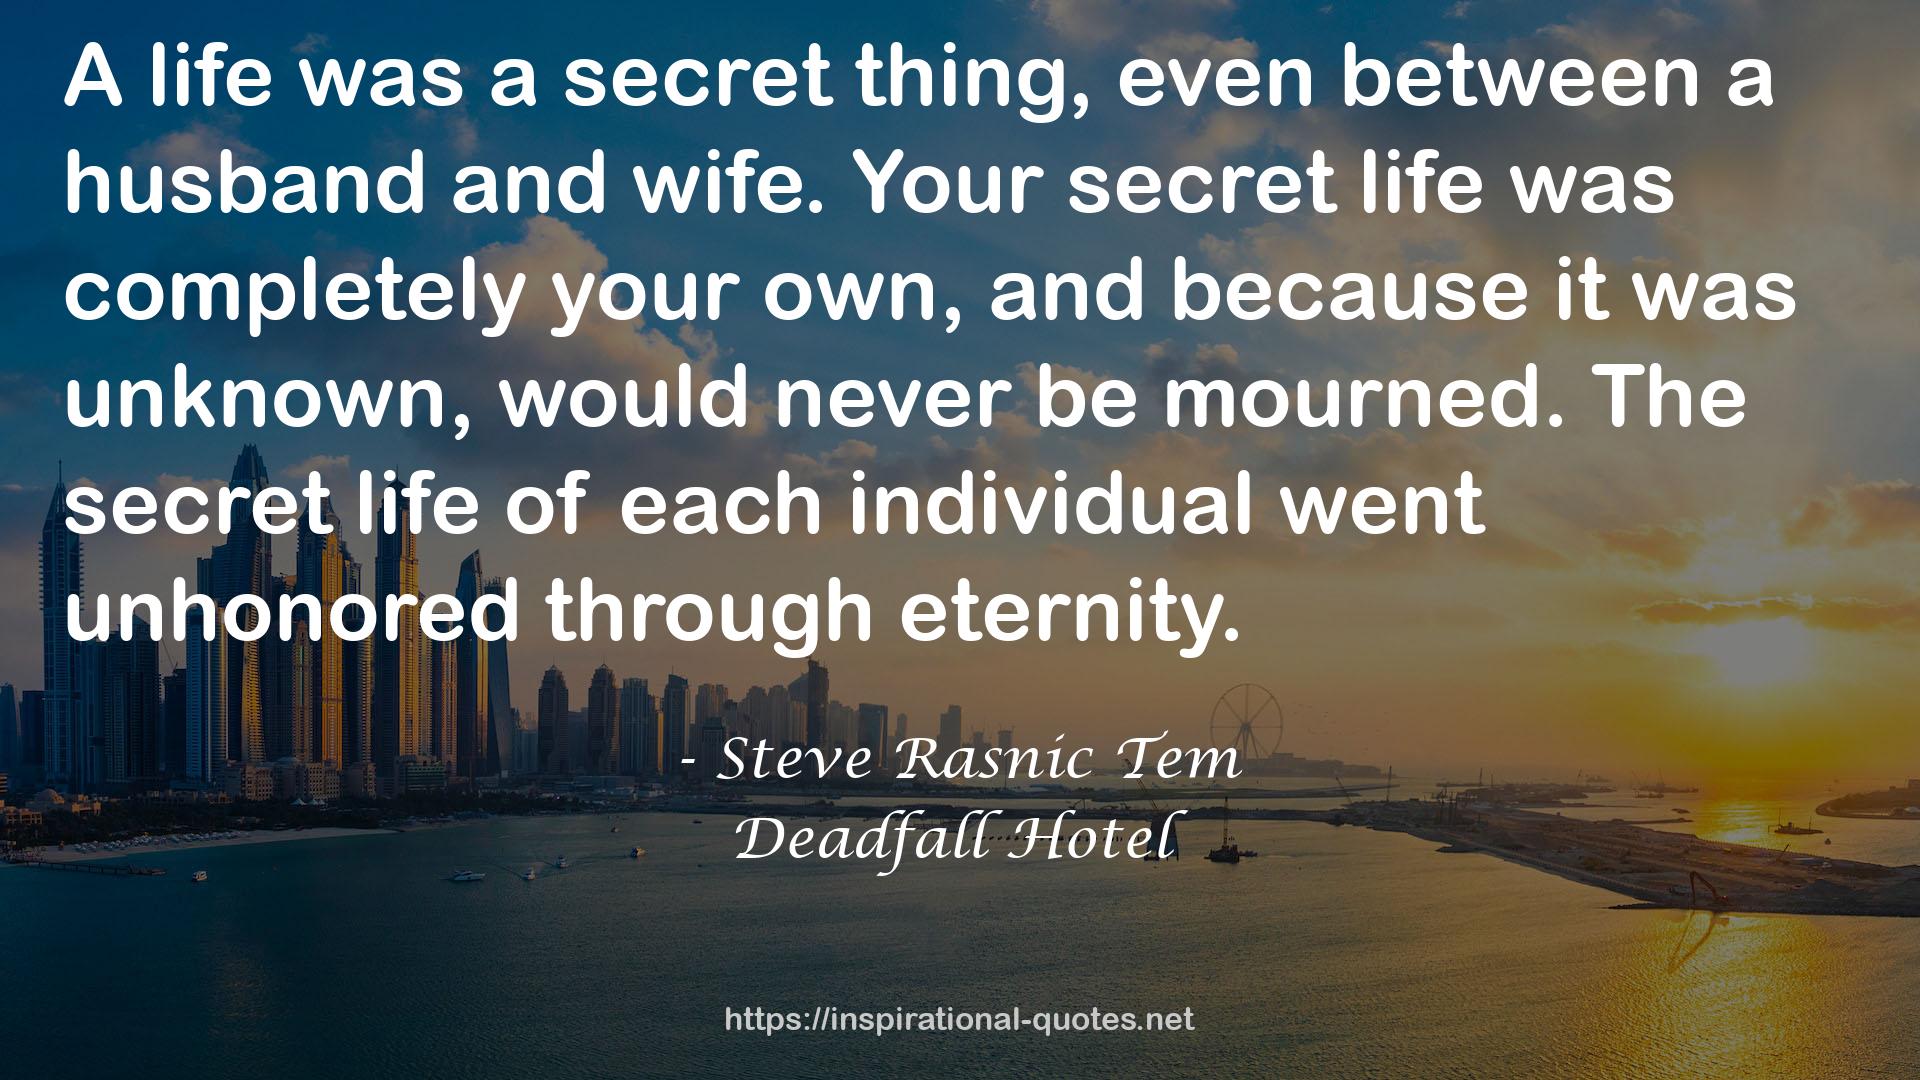 Deadfall Hotel QUOTES